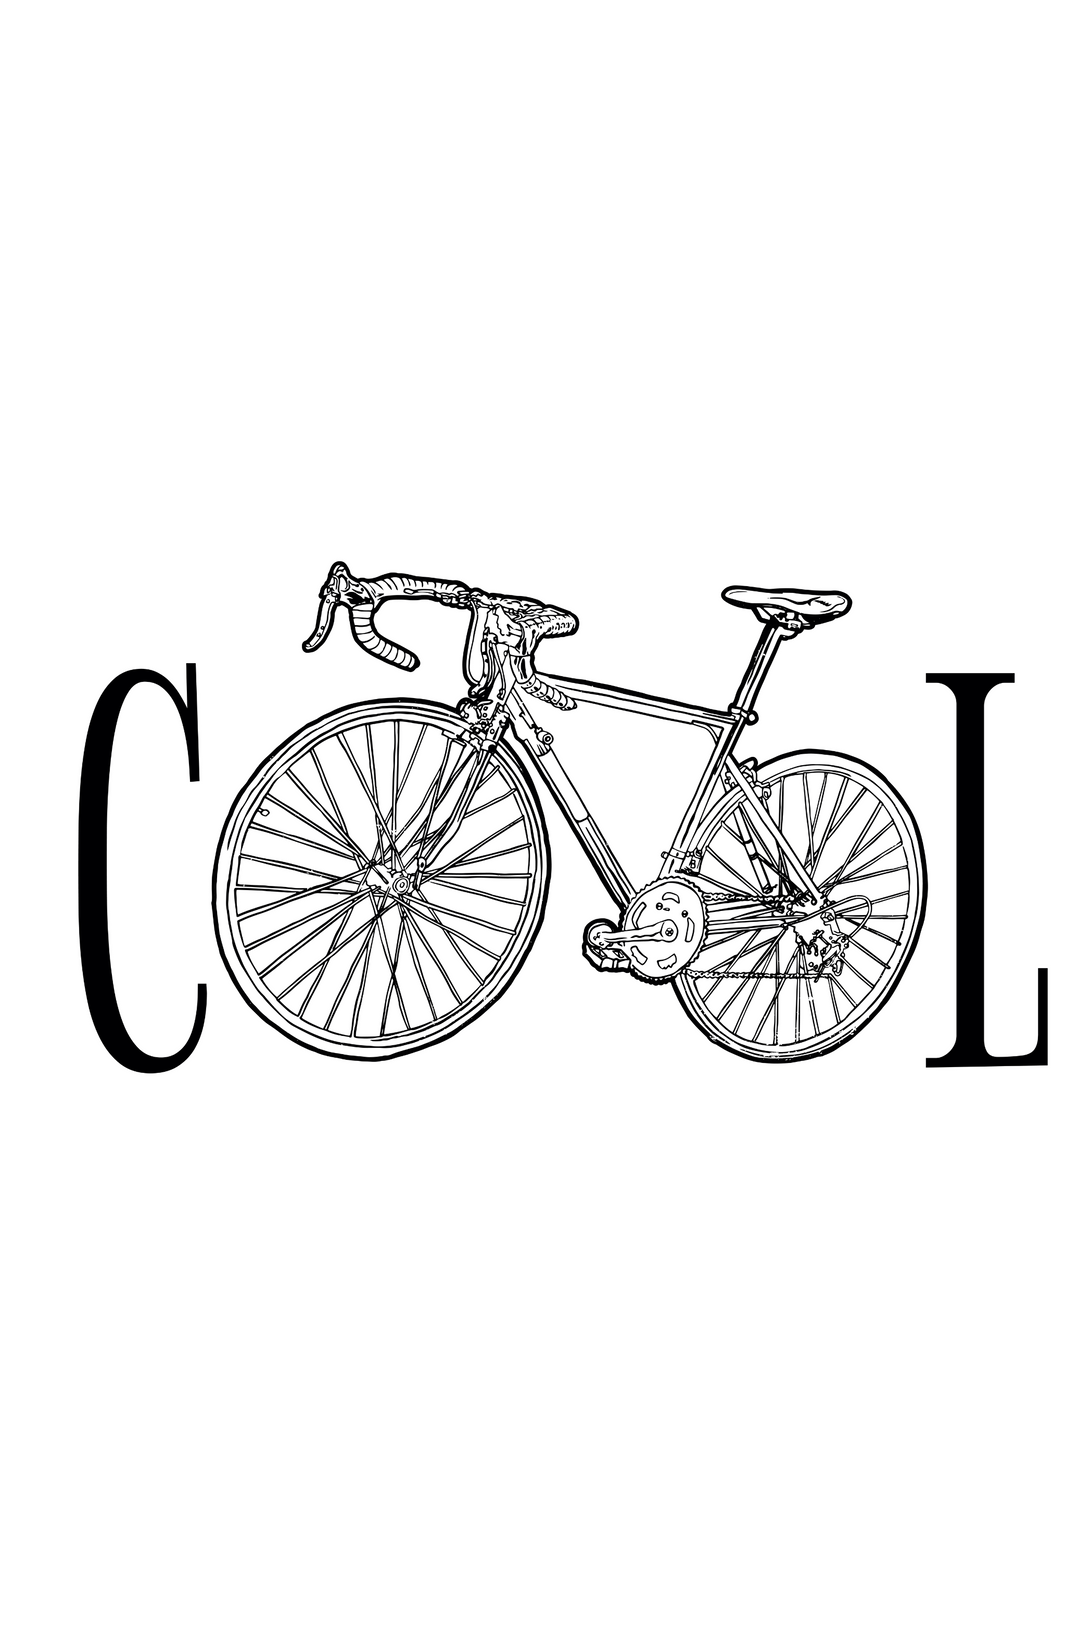 Cycle Coolness Printed T-Shirt For Men - WowWaves - 1